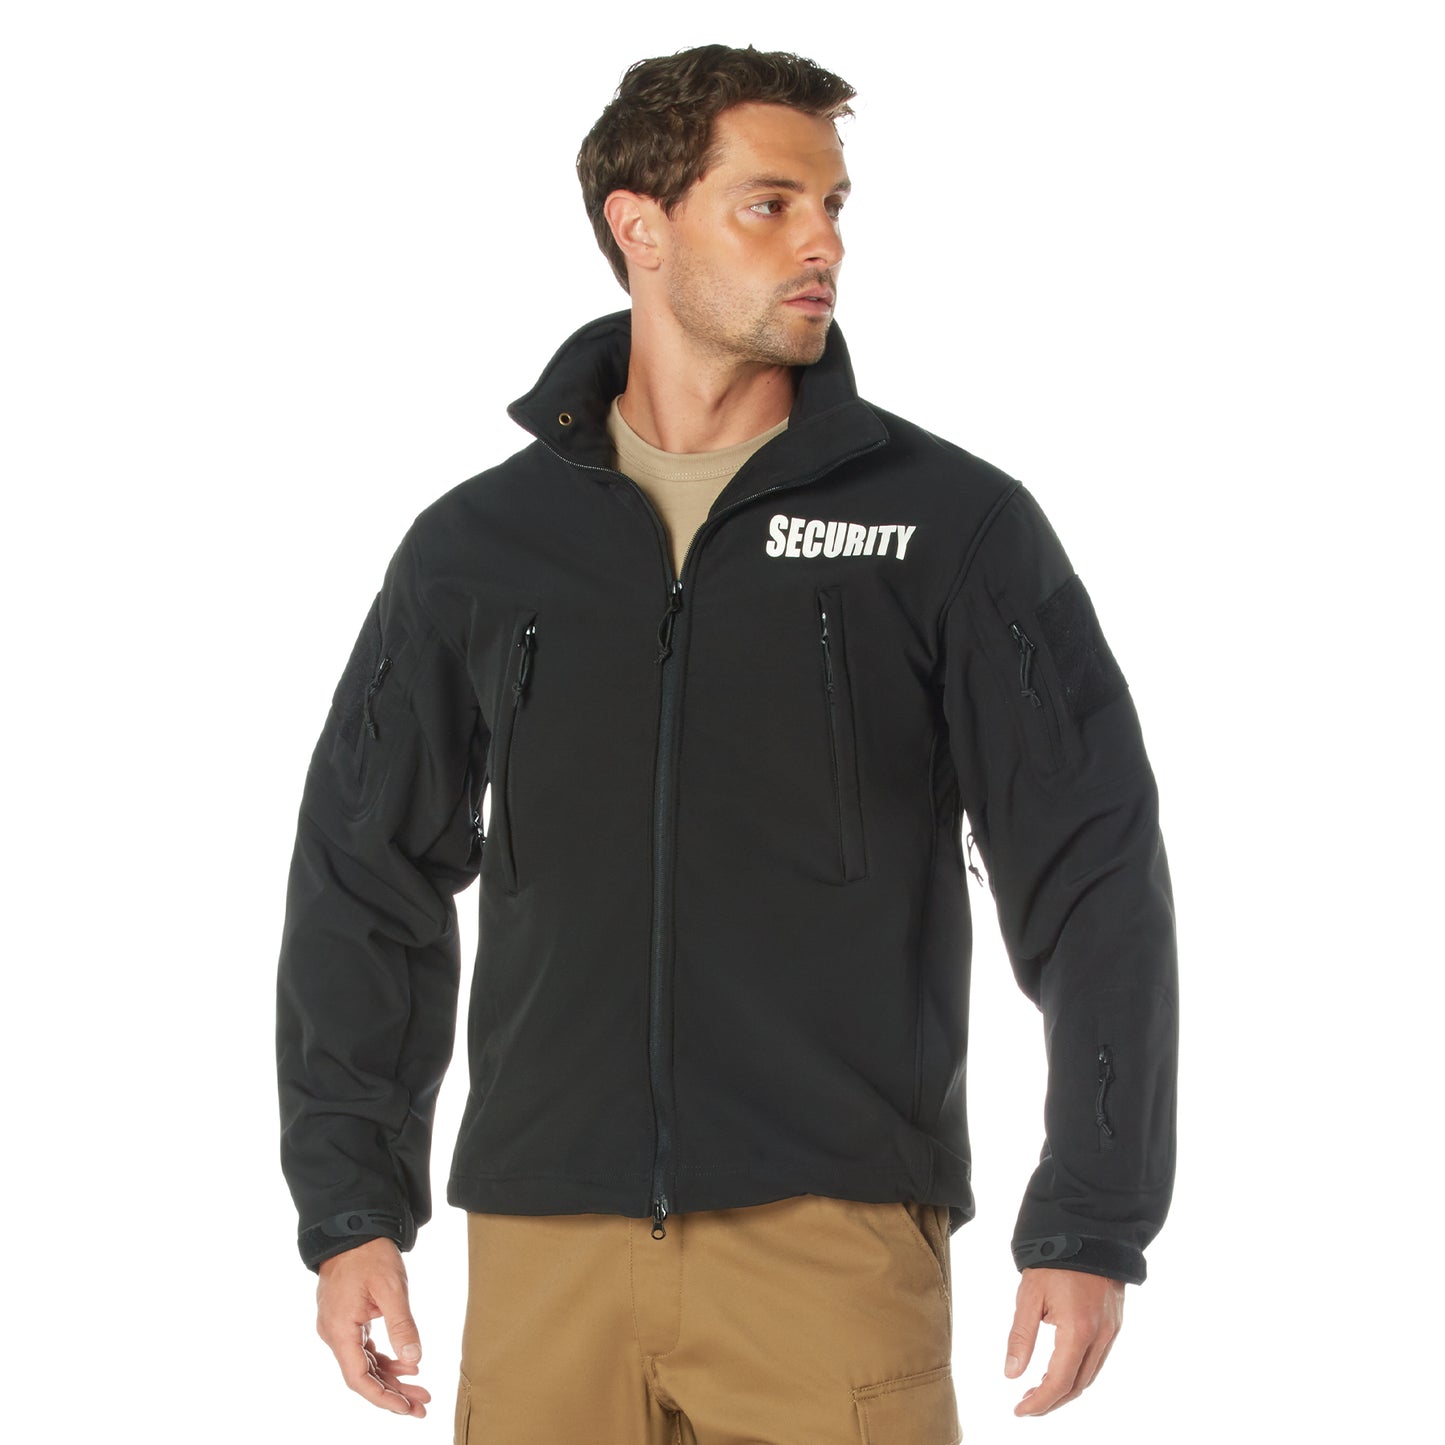 Rothco Spec Ops Soft Shell Security Jacket - Black